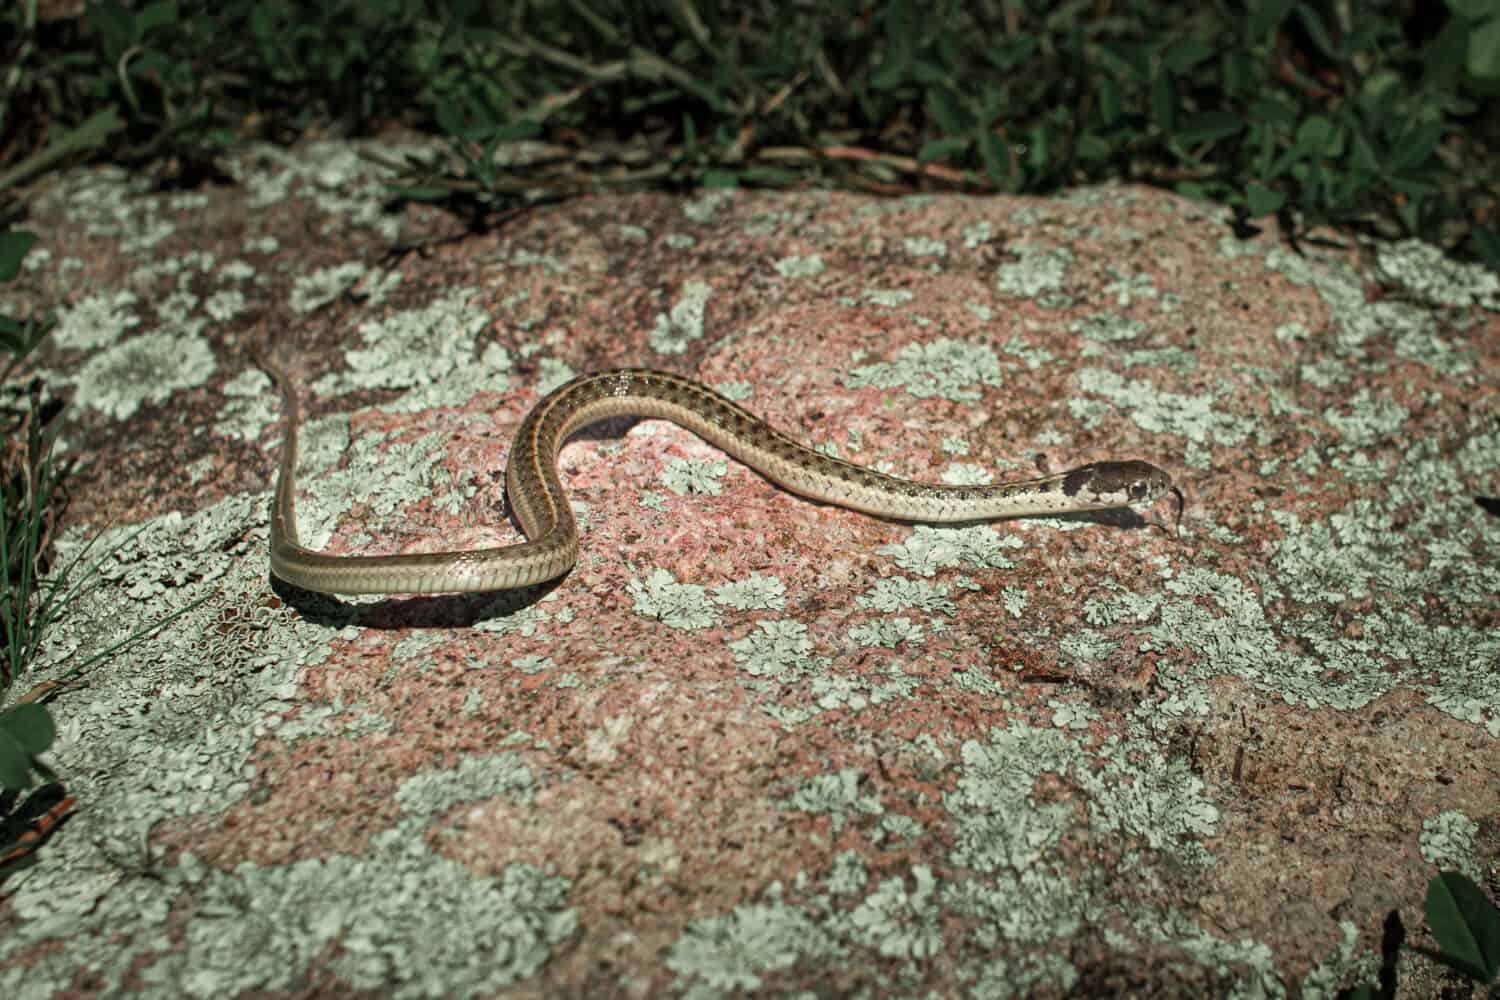 garter snake of the sierra Chihuahua Mexico